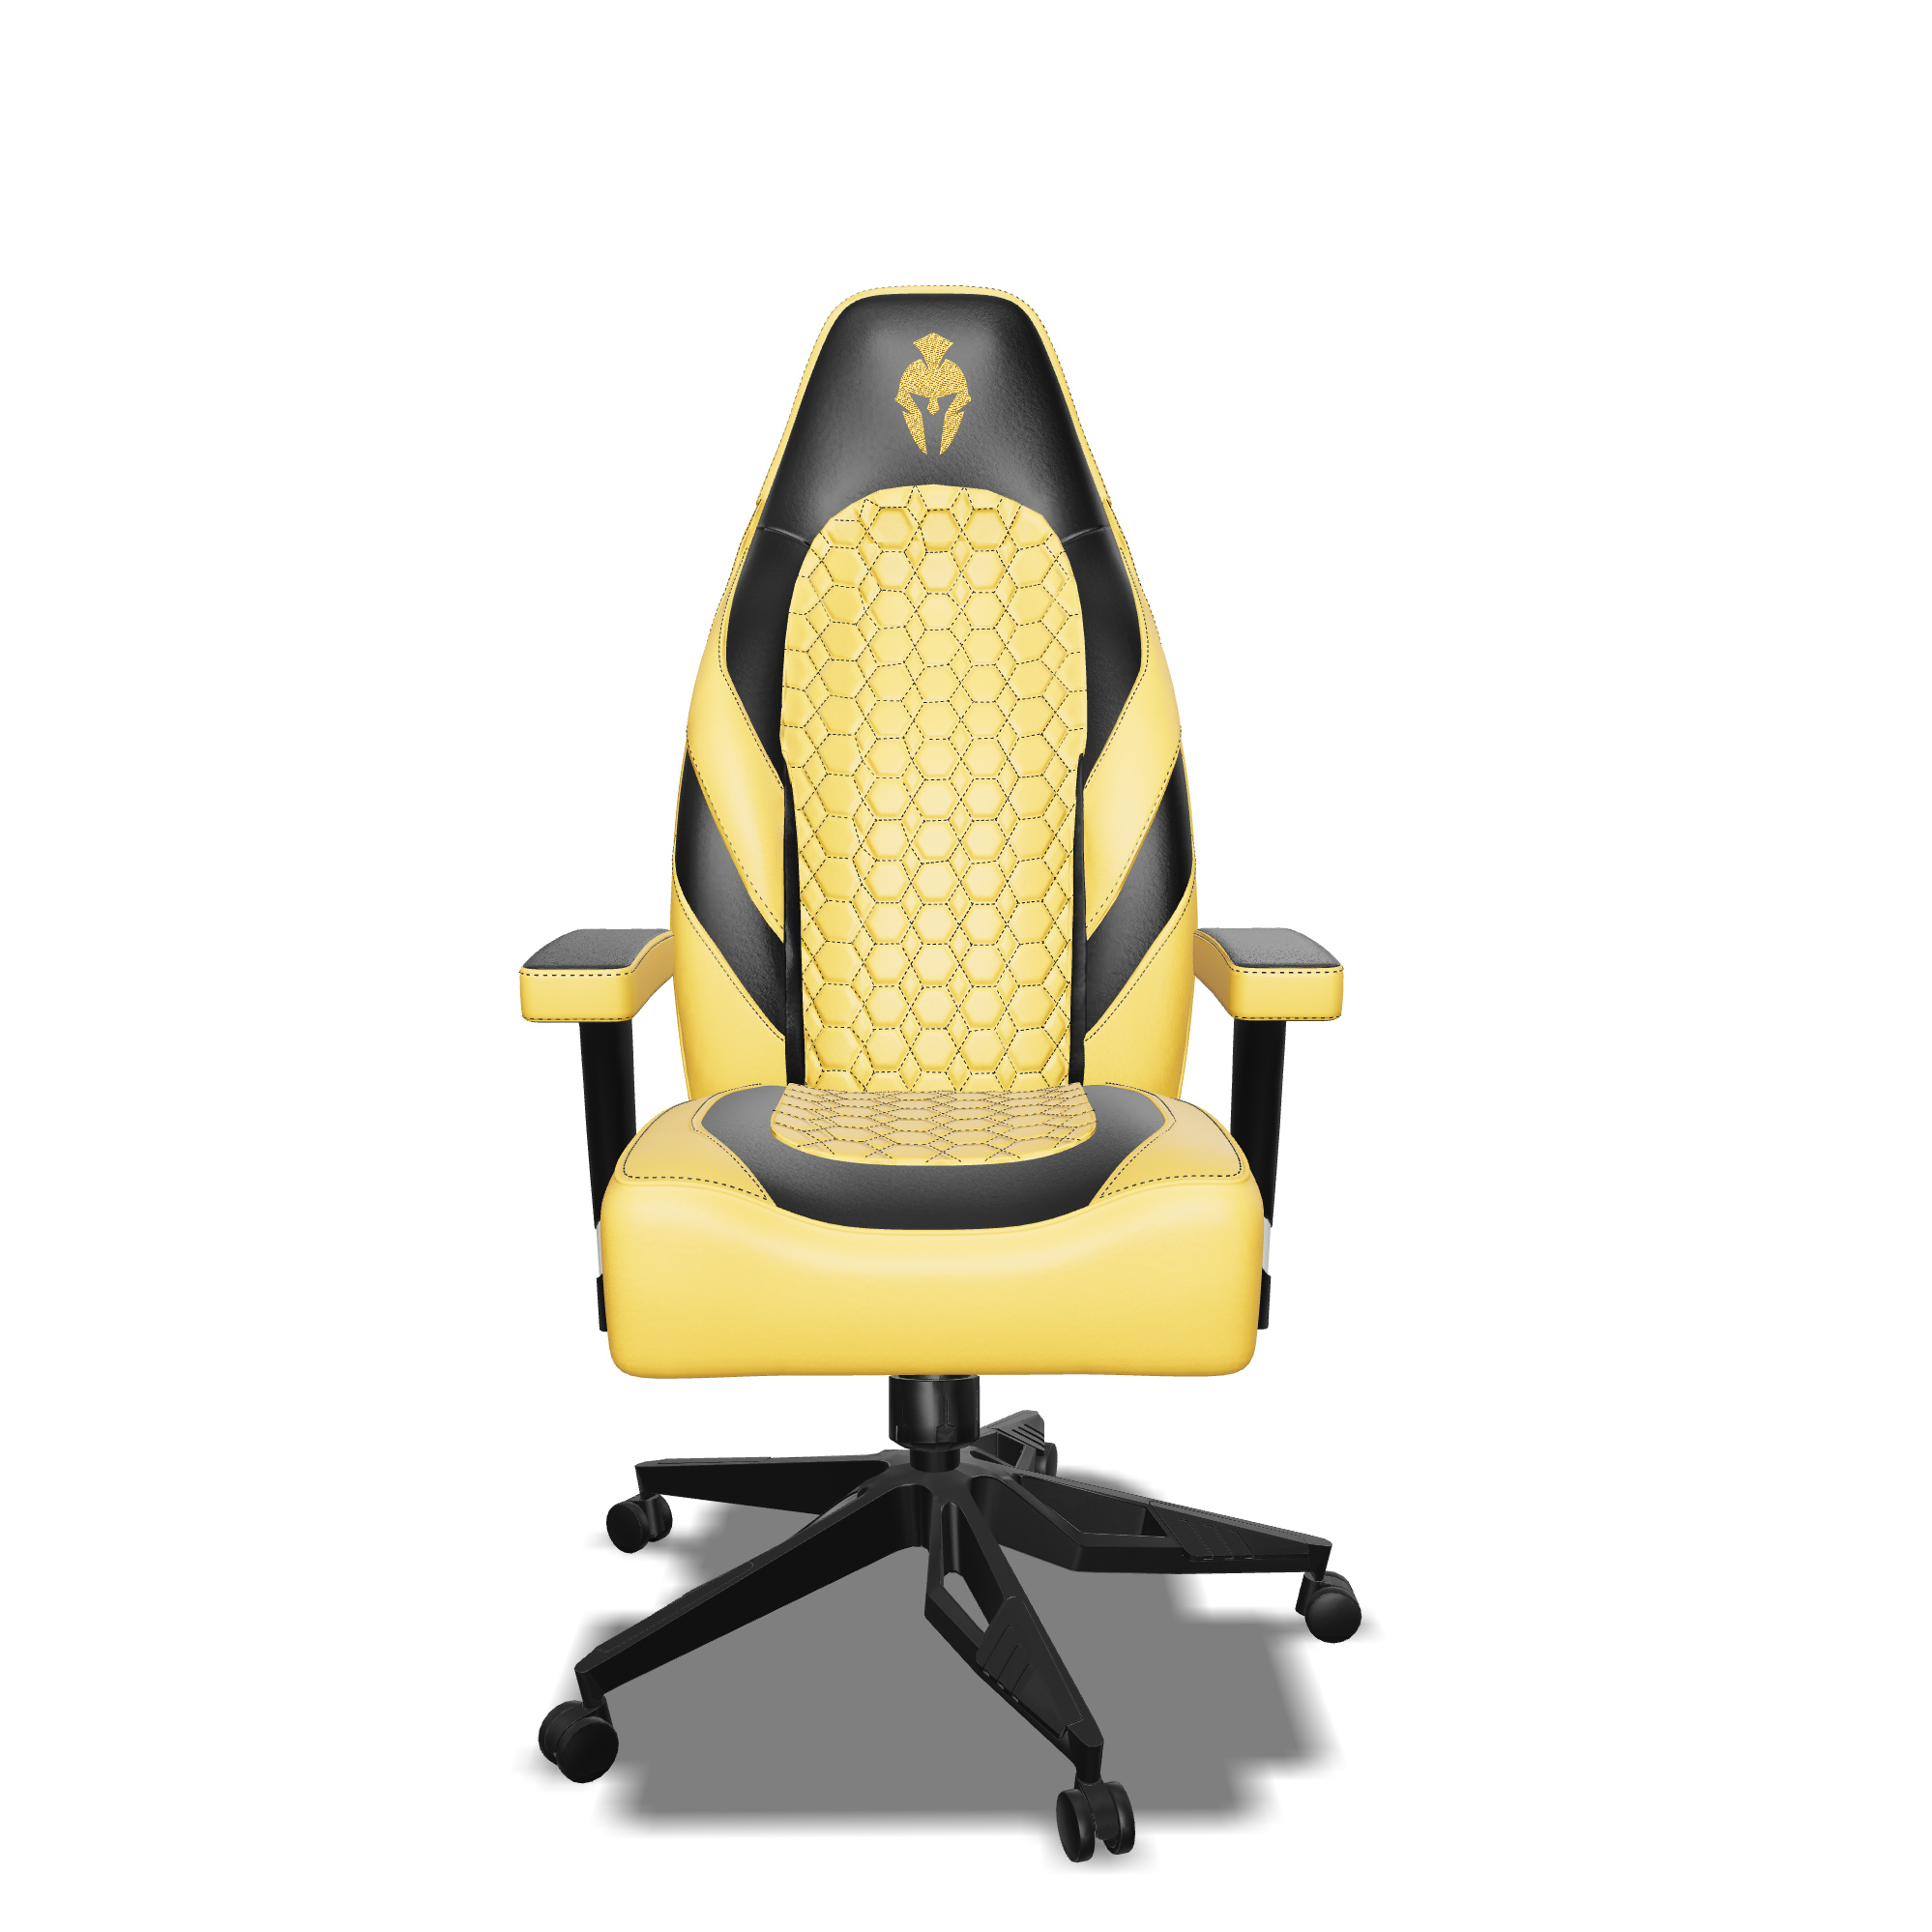 Black and Yellow gaming chair front view